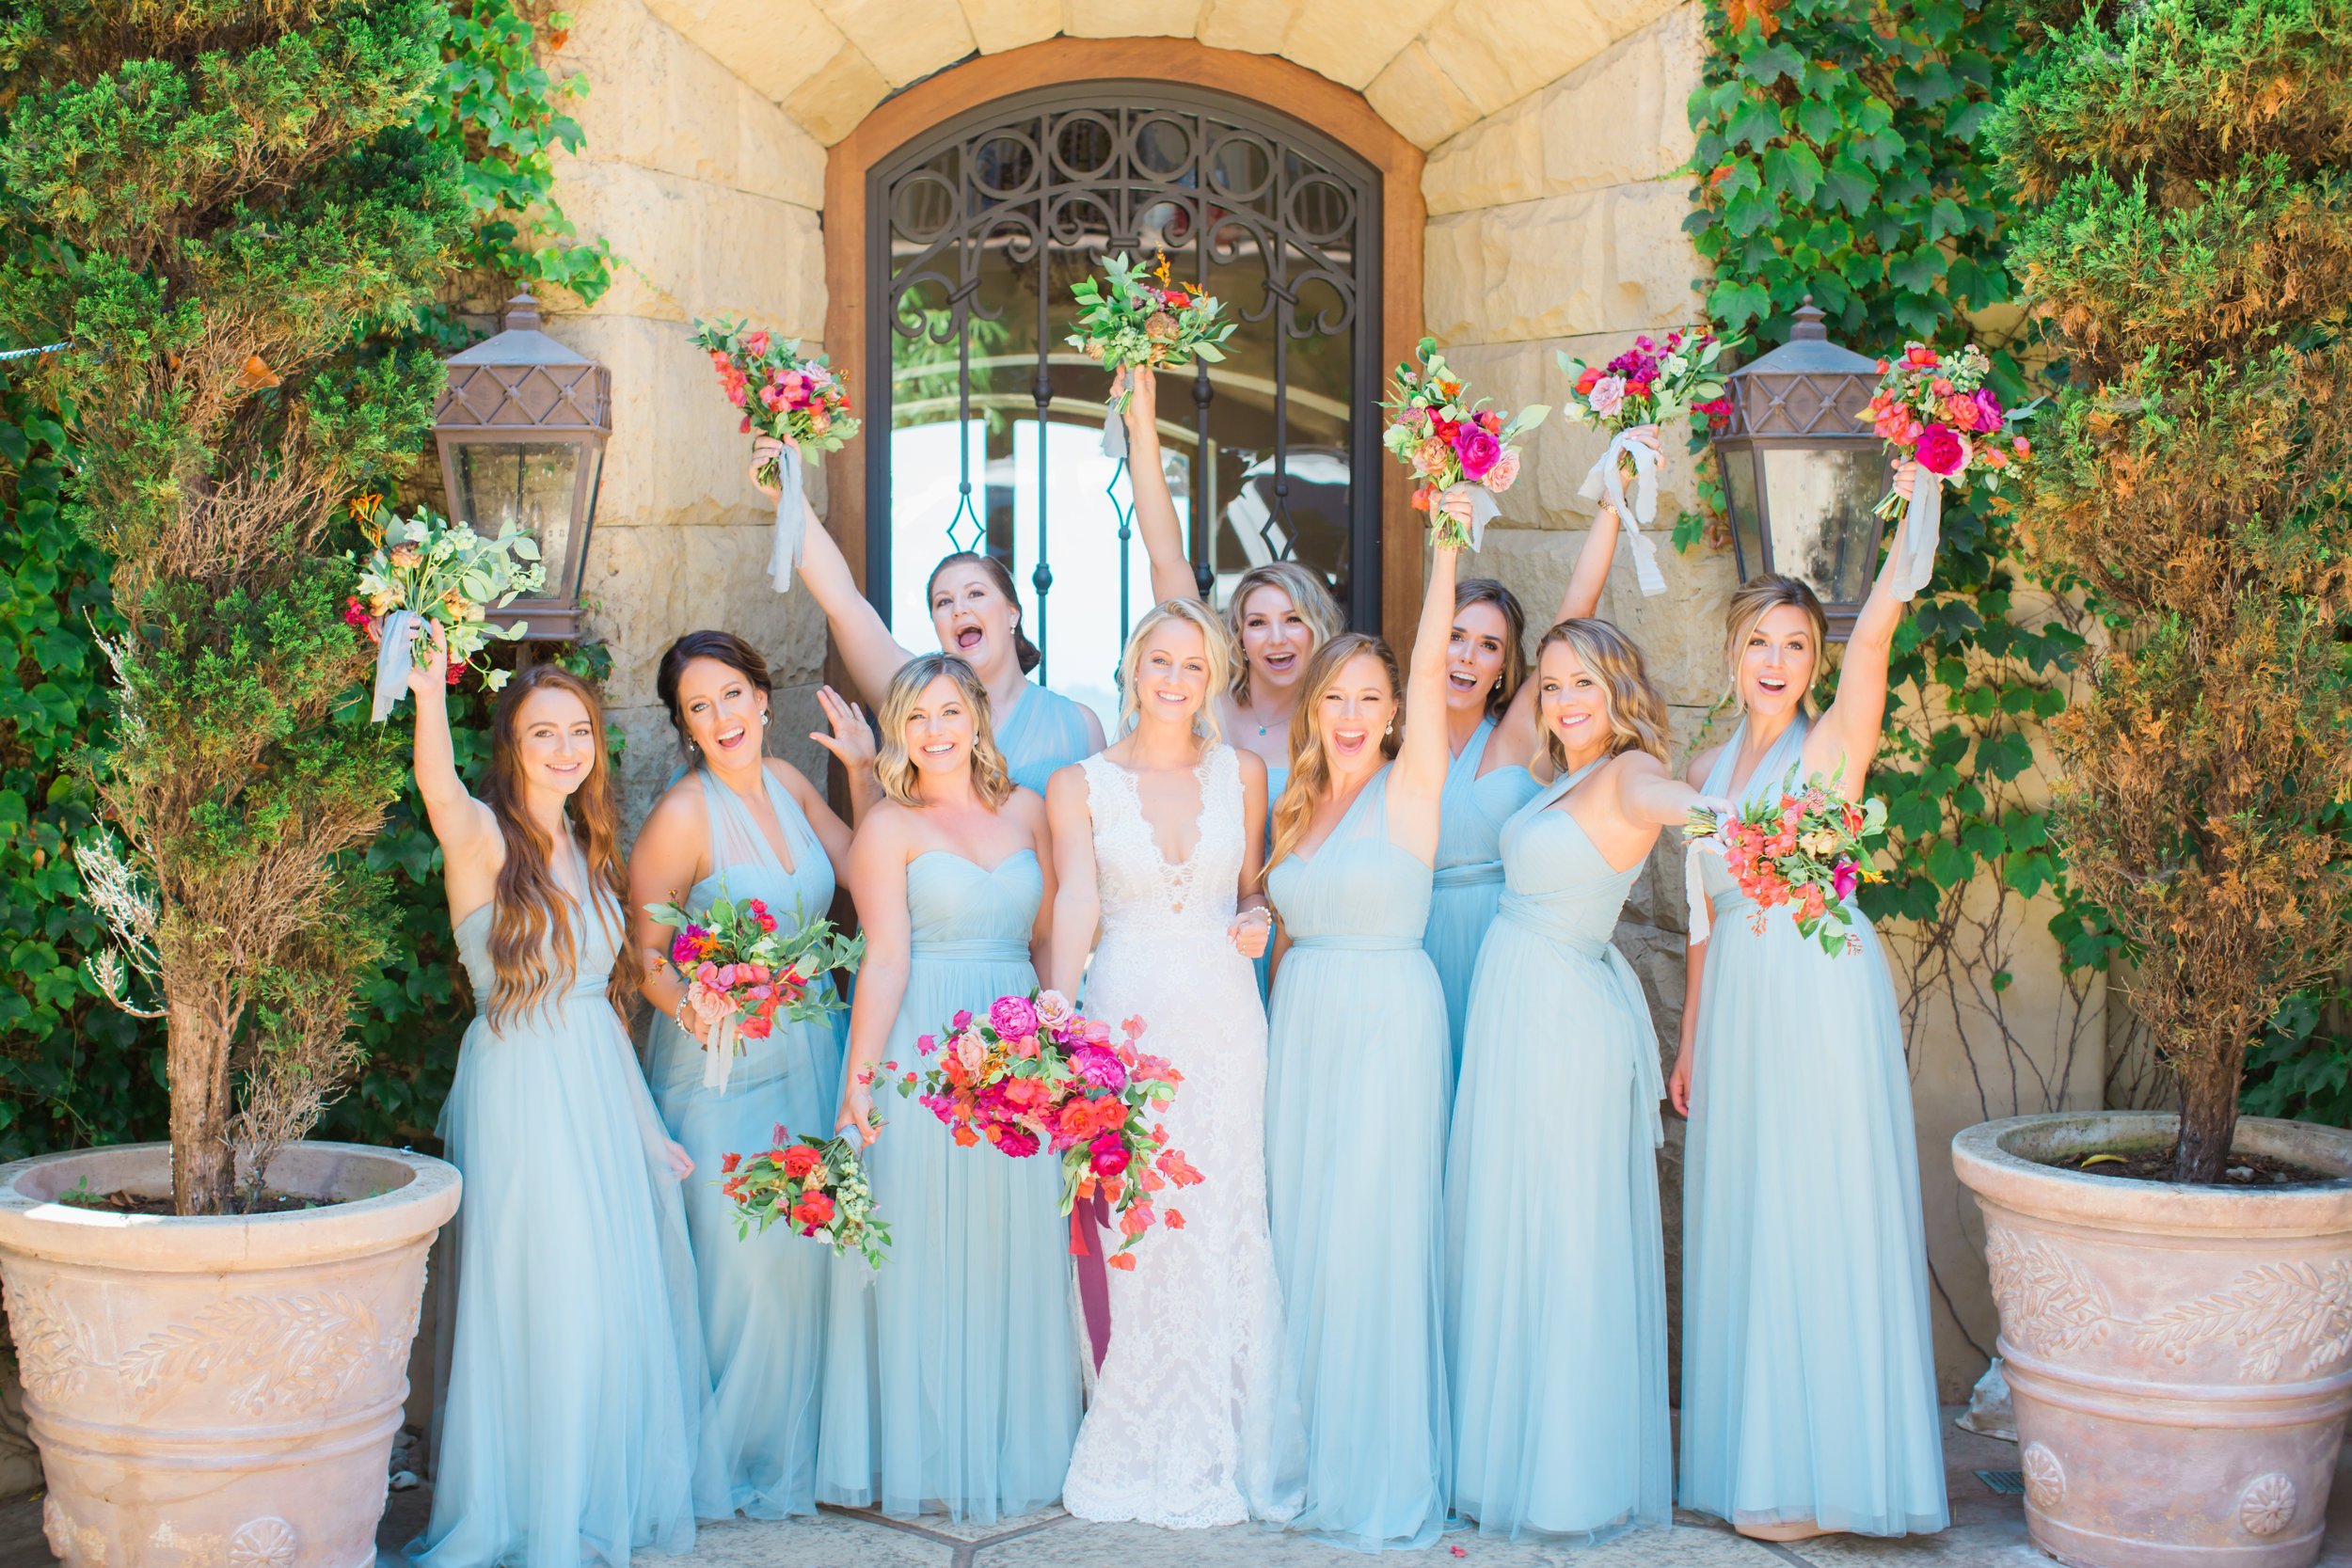 www.santabarbarawedding.com | James and Jess Photography | Our Lady of Mount Carmel | Amazing Day Events | TEAM Hair &amp; Makeup | Double Take | La Fleur du Jour | Bride and Bridesmaids